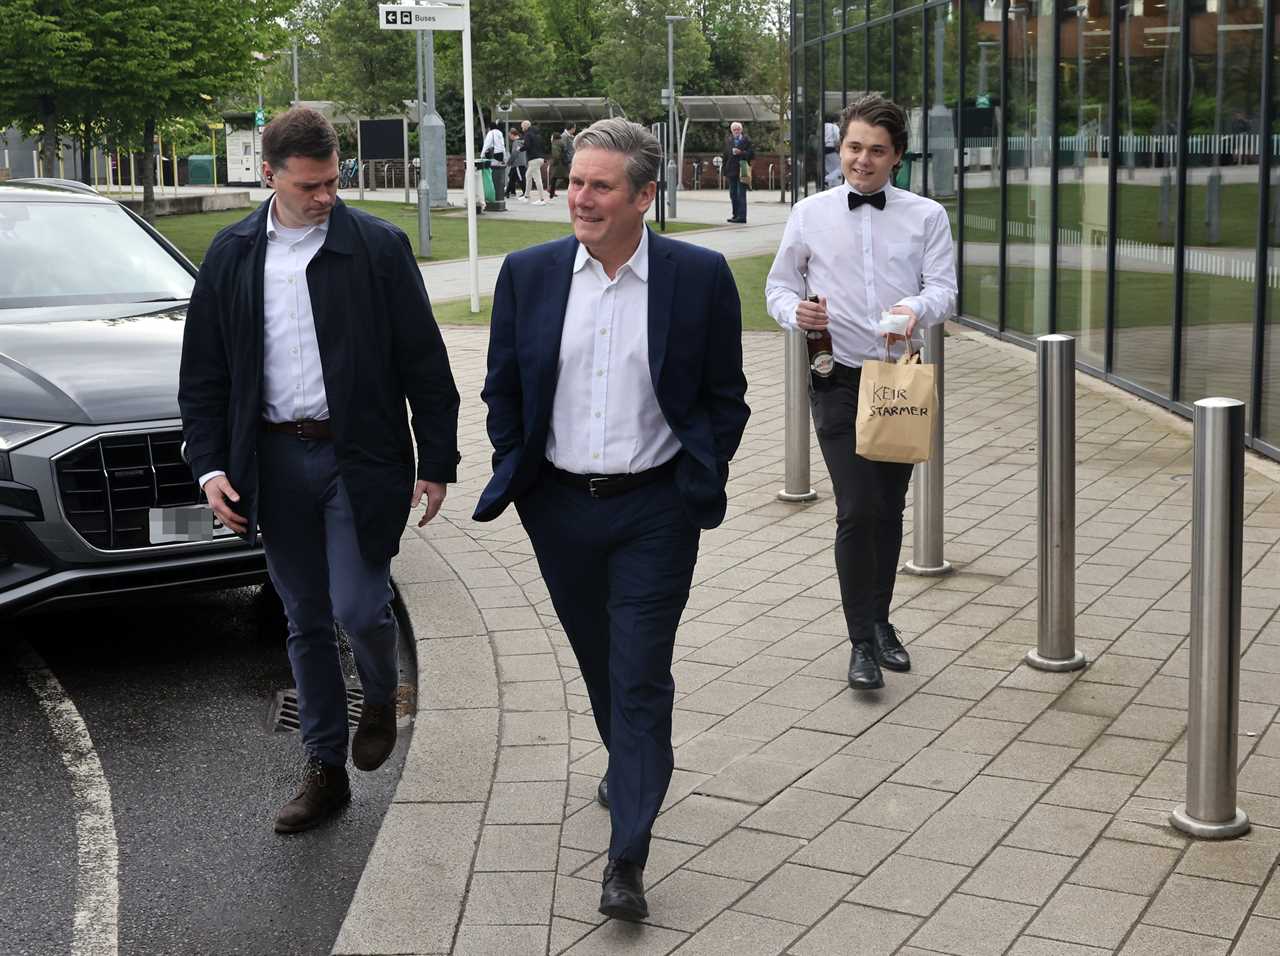 Sir Keir Starmer turns down Indian takeaway and San Miguel from The Sun after TV bruising